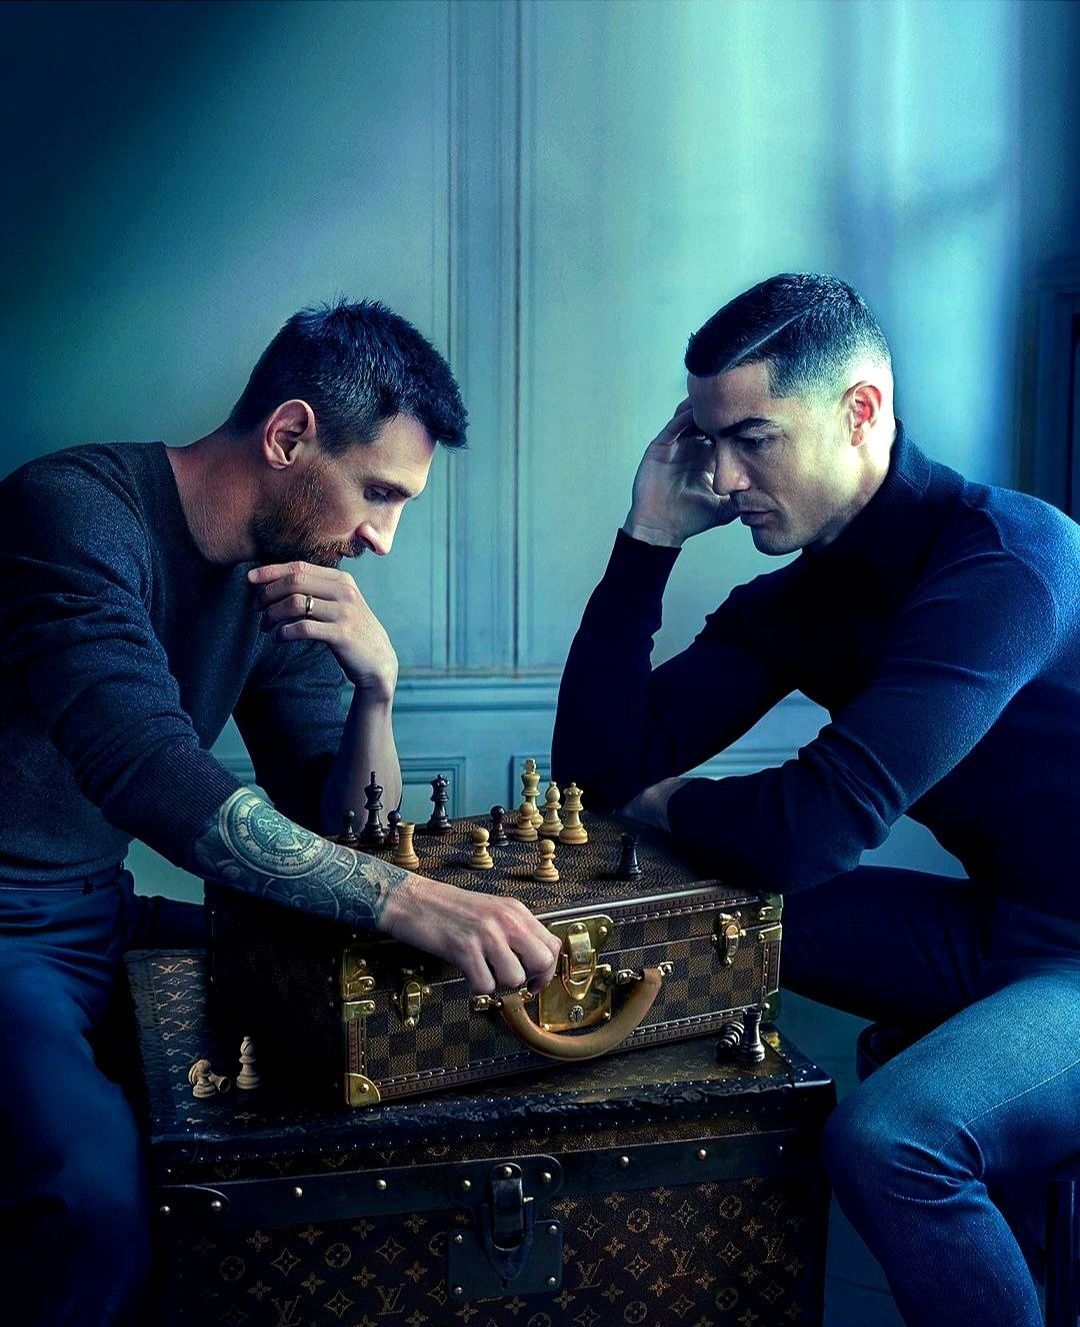 Two men playing chess on a Louis Vuitton trunk - Chess